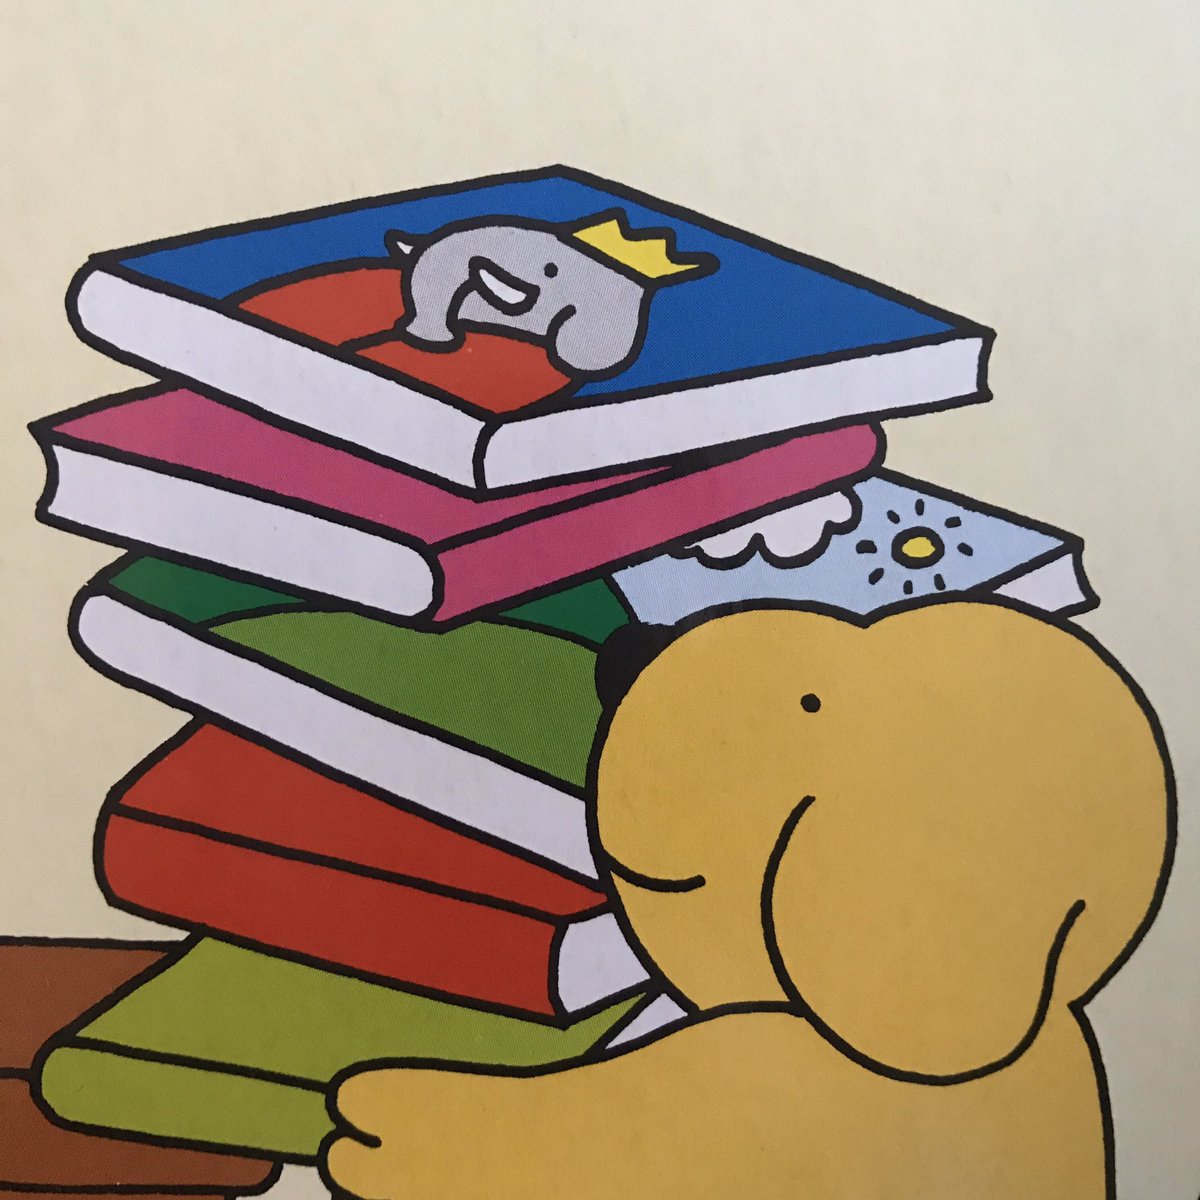 Books can be borrowed from libraries or bought in shops and then taken home to read from the comfort of your favourite chair... keen readers should probably use bags for this purpose. Also is this a Babar book amongst our little friend’s library haul?  #booksinchildrensbooks